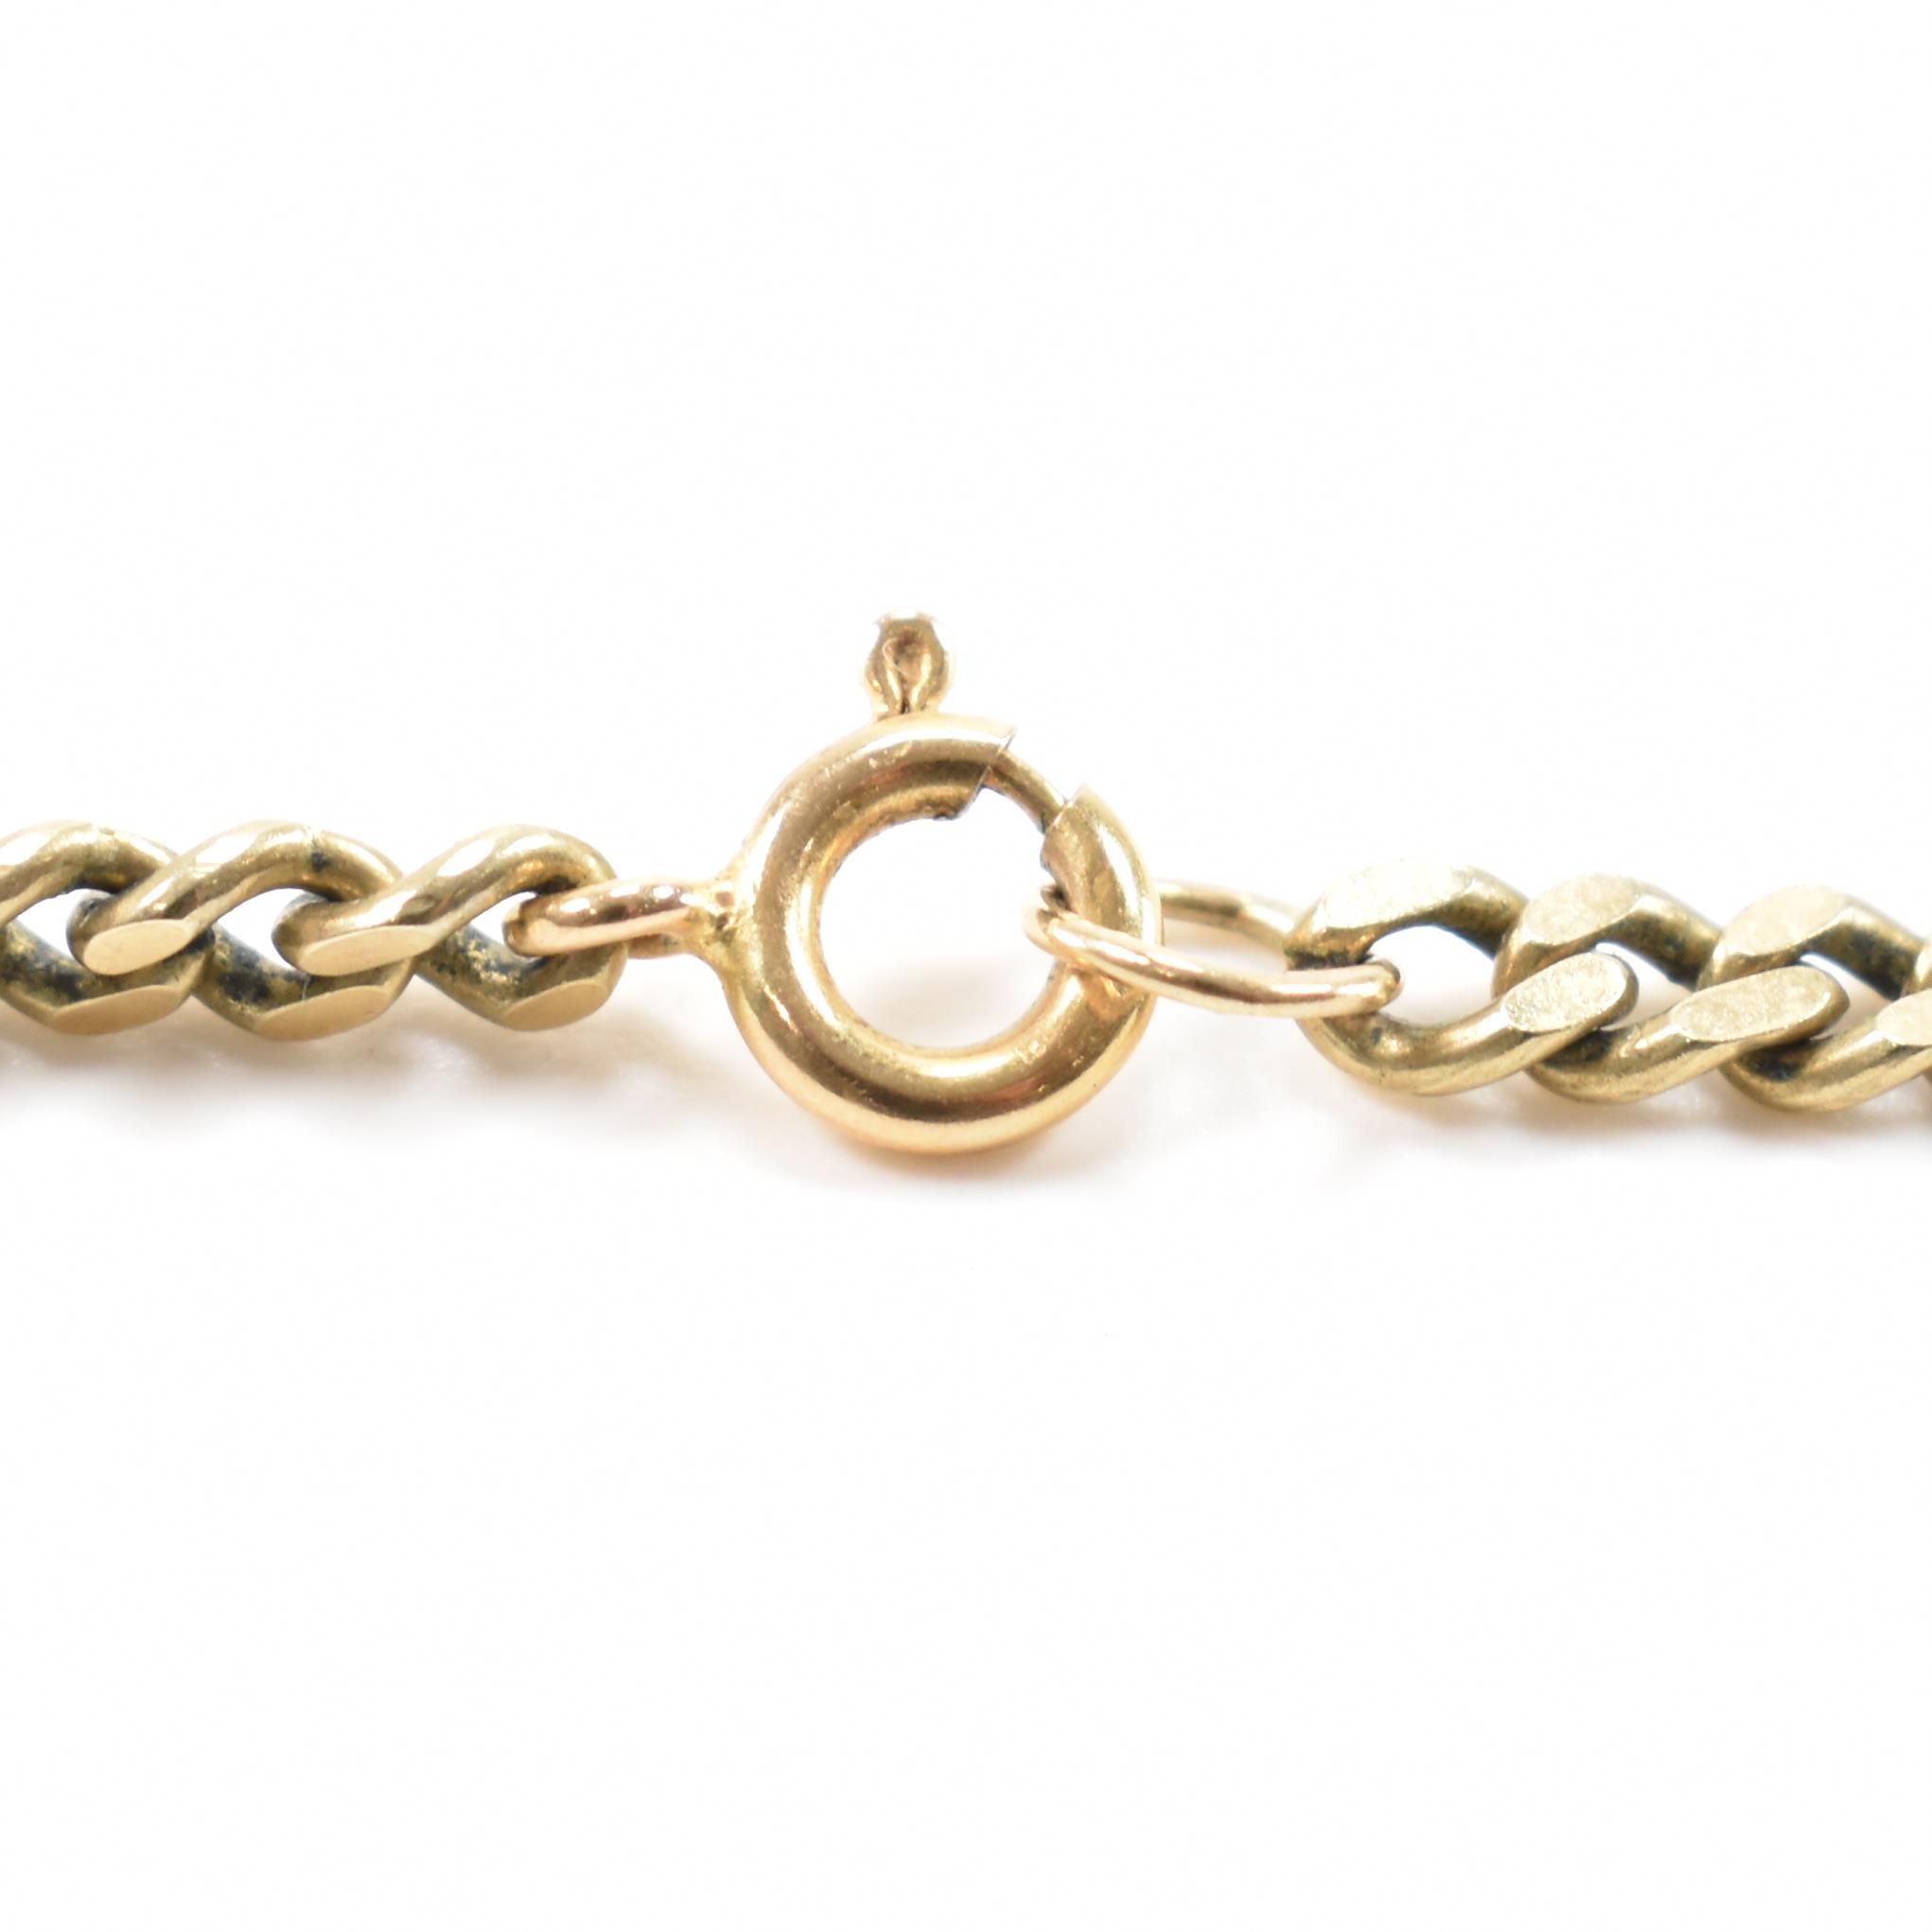 HALLMARKED 9CT GOLD CHAIN NECKLACE - Image 3 of 6